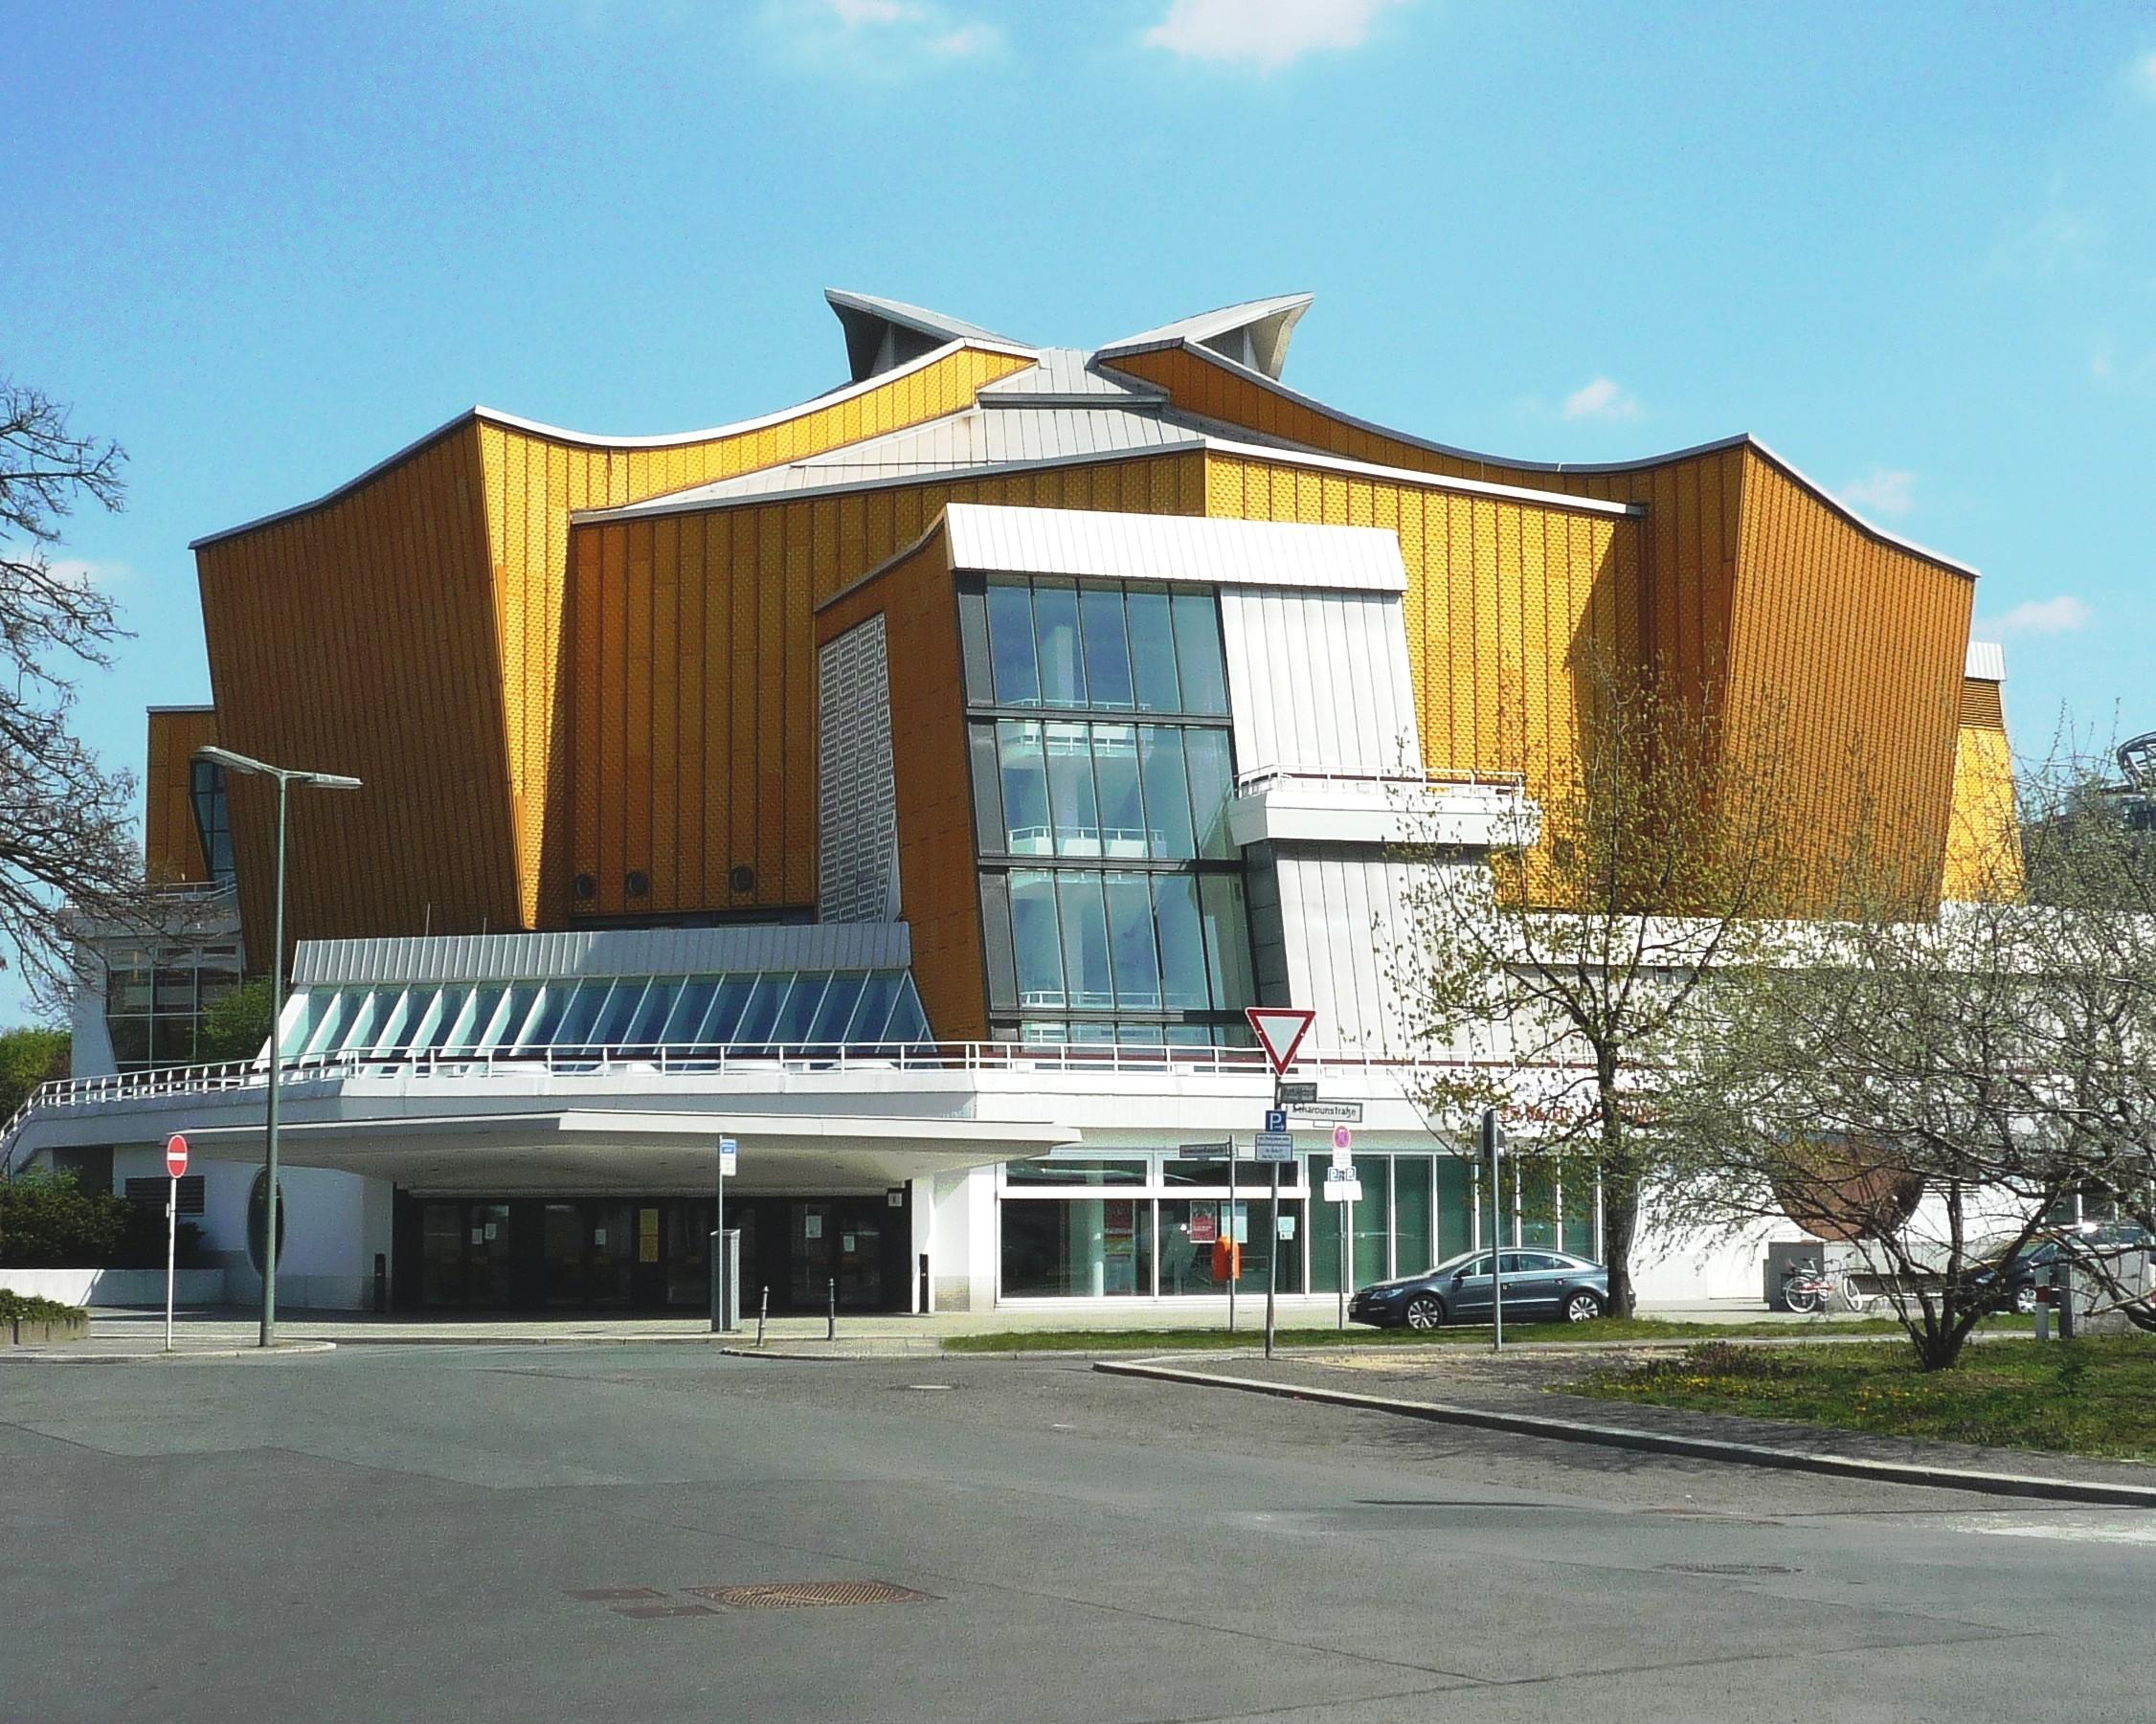 Cover image of this place Berliner Philharmonie concert hall